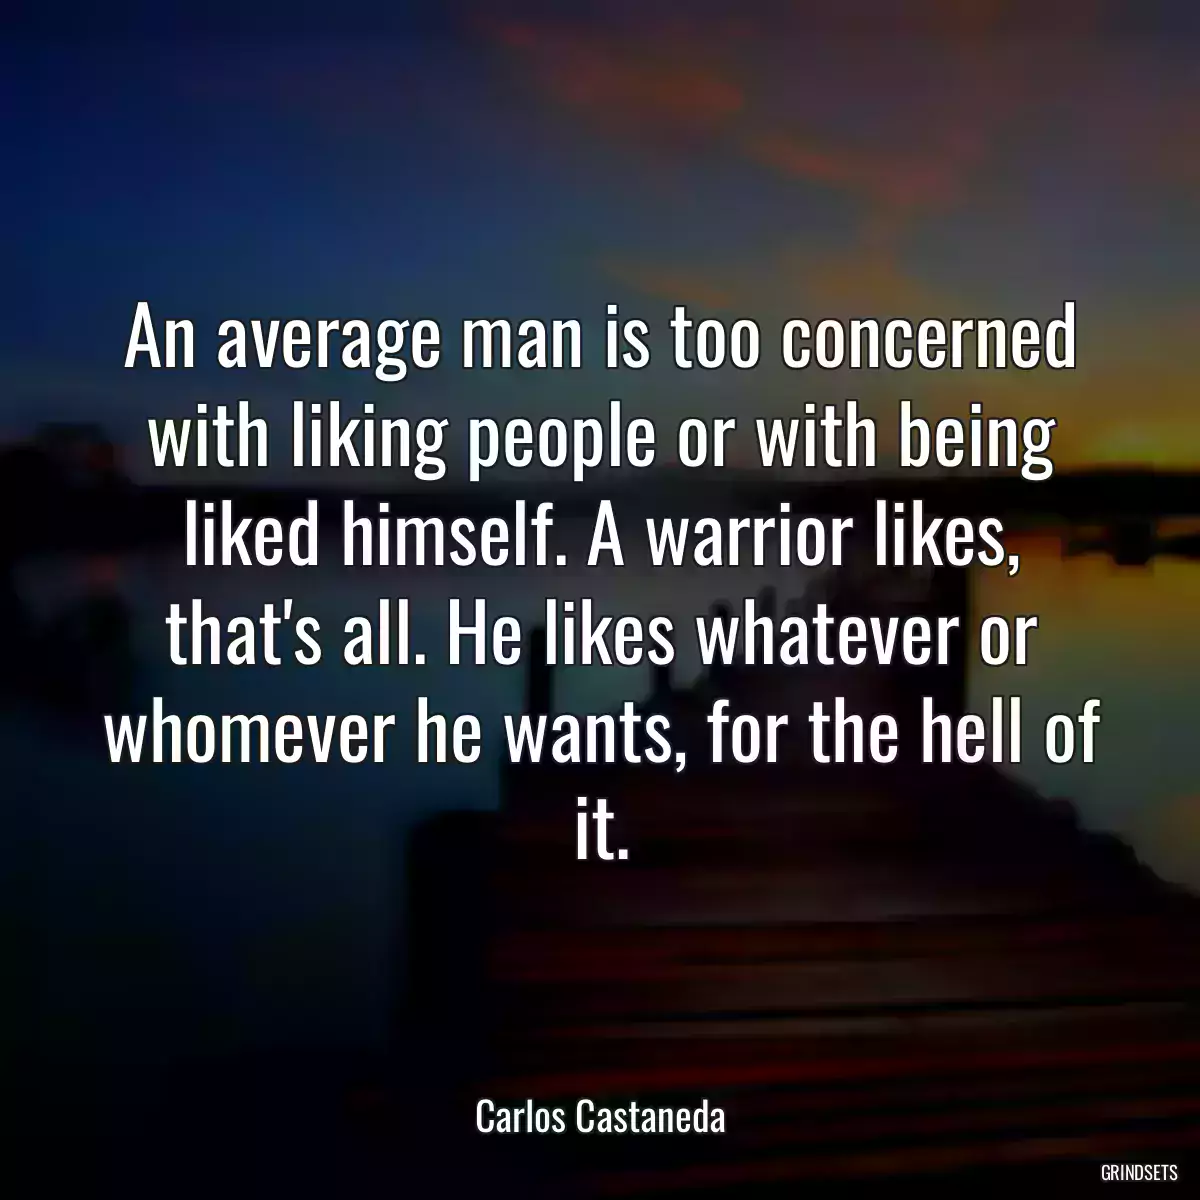 An average man is too concerned with liking people or with being liked himself. A warrior likes, that\'s all. He likes whatever or whomever he wants, for the hell of it.